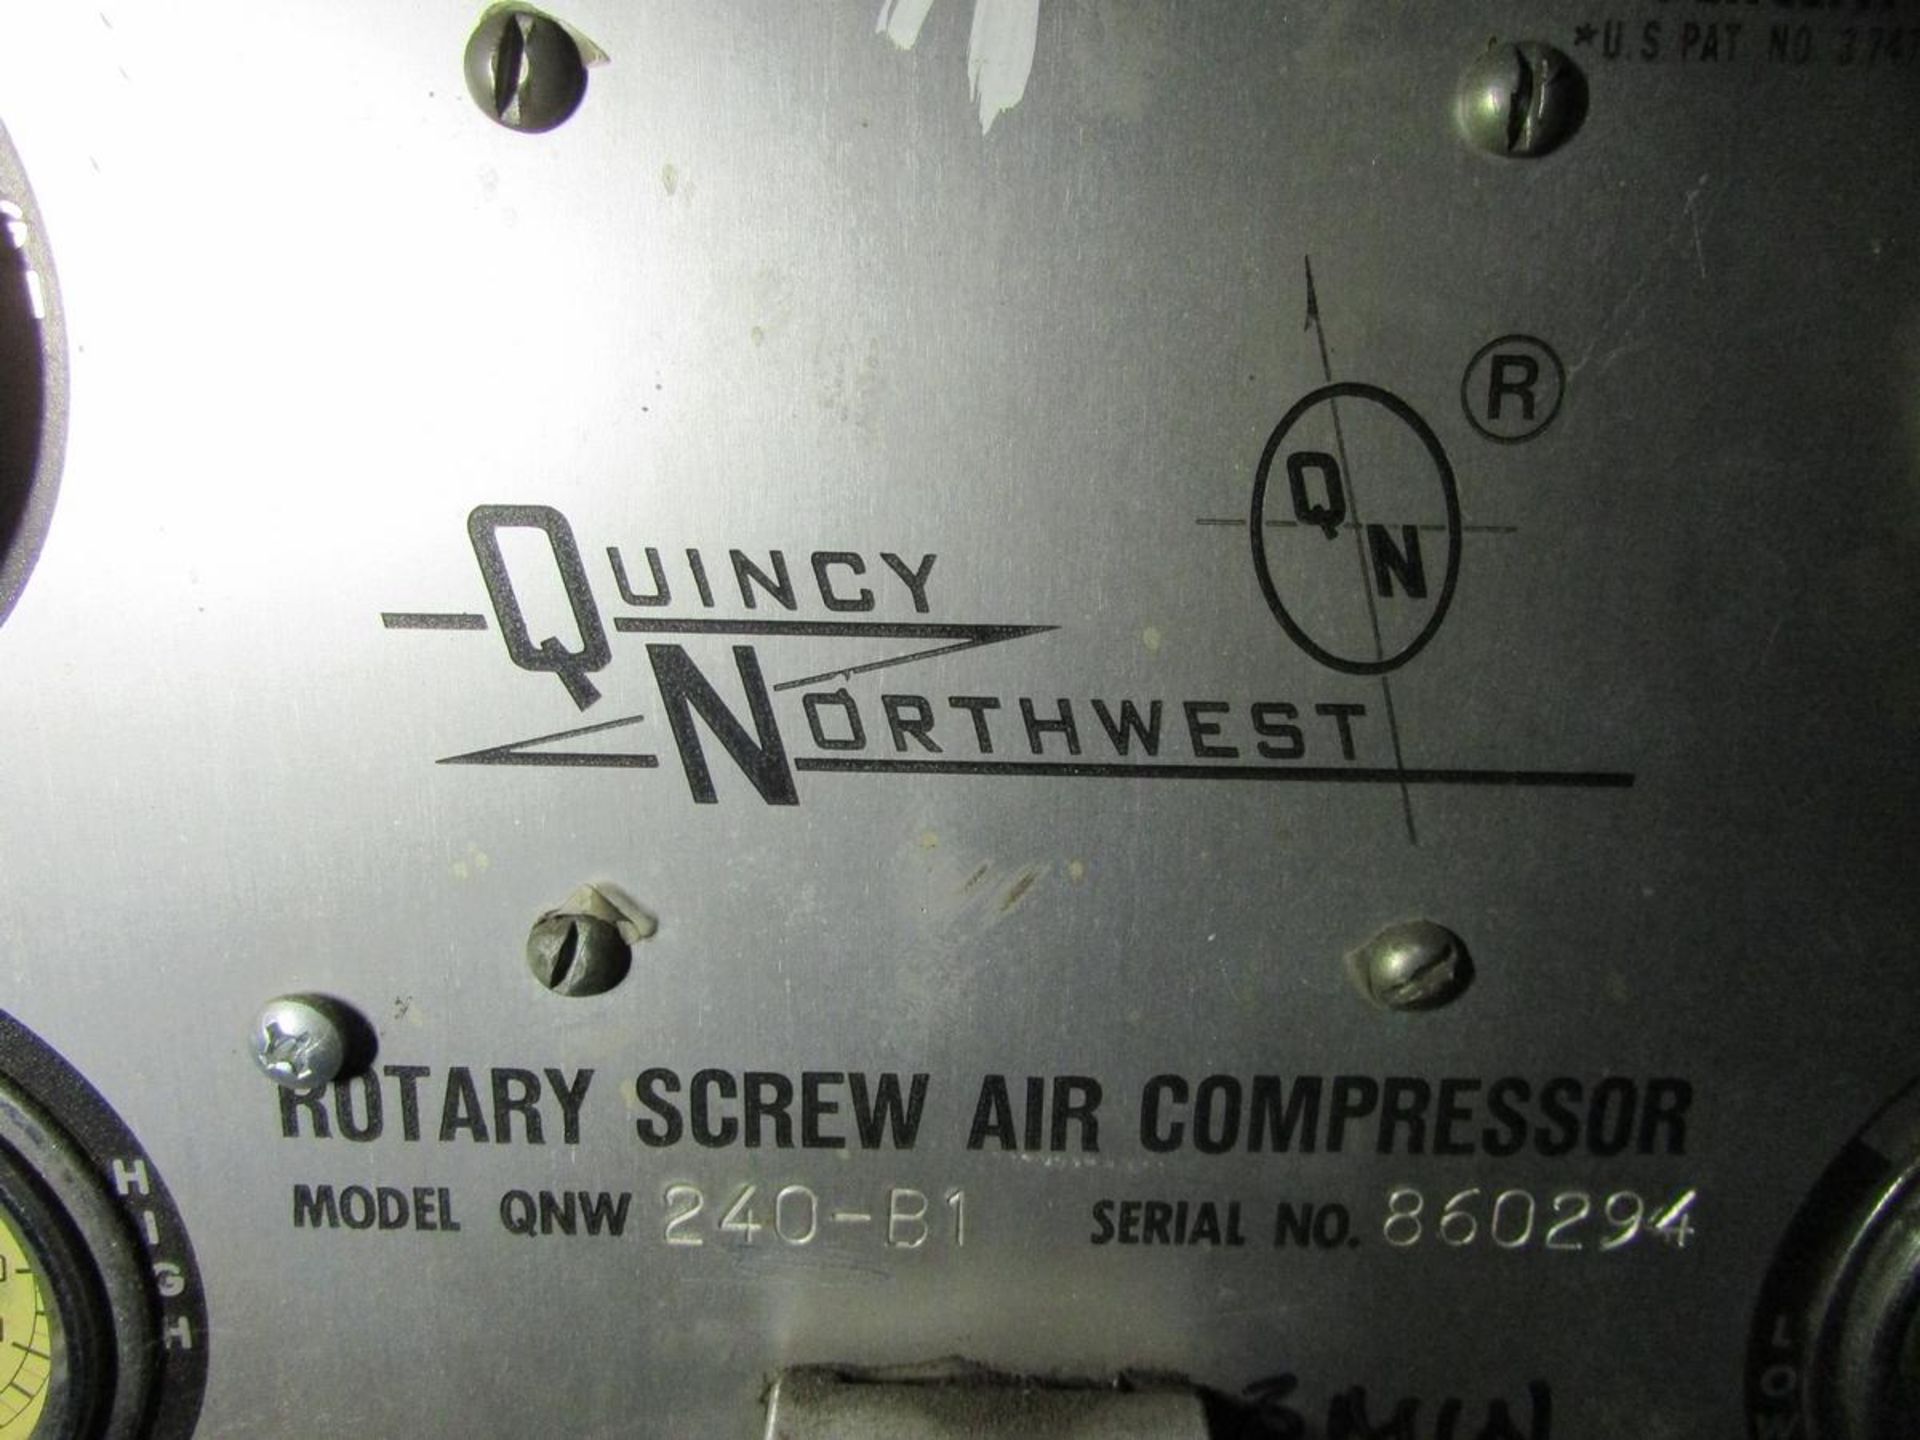 Quincy Northwest 50 HP Rotary Screw Air Compressor - Image 6 of 9